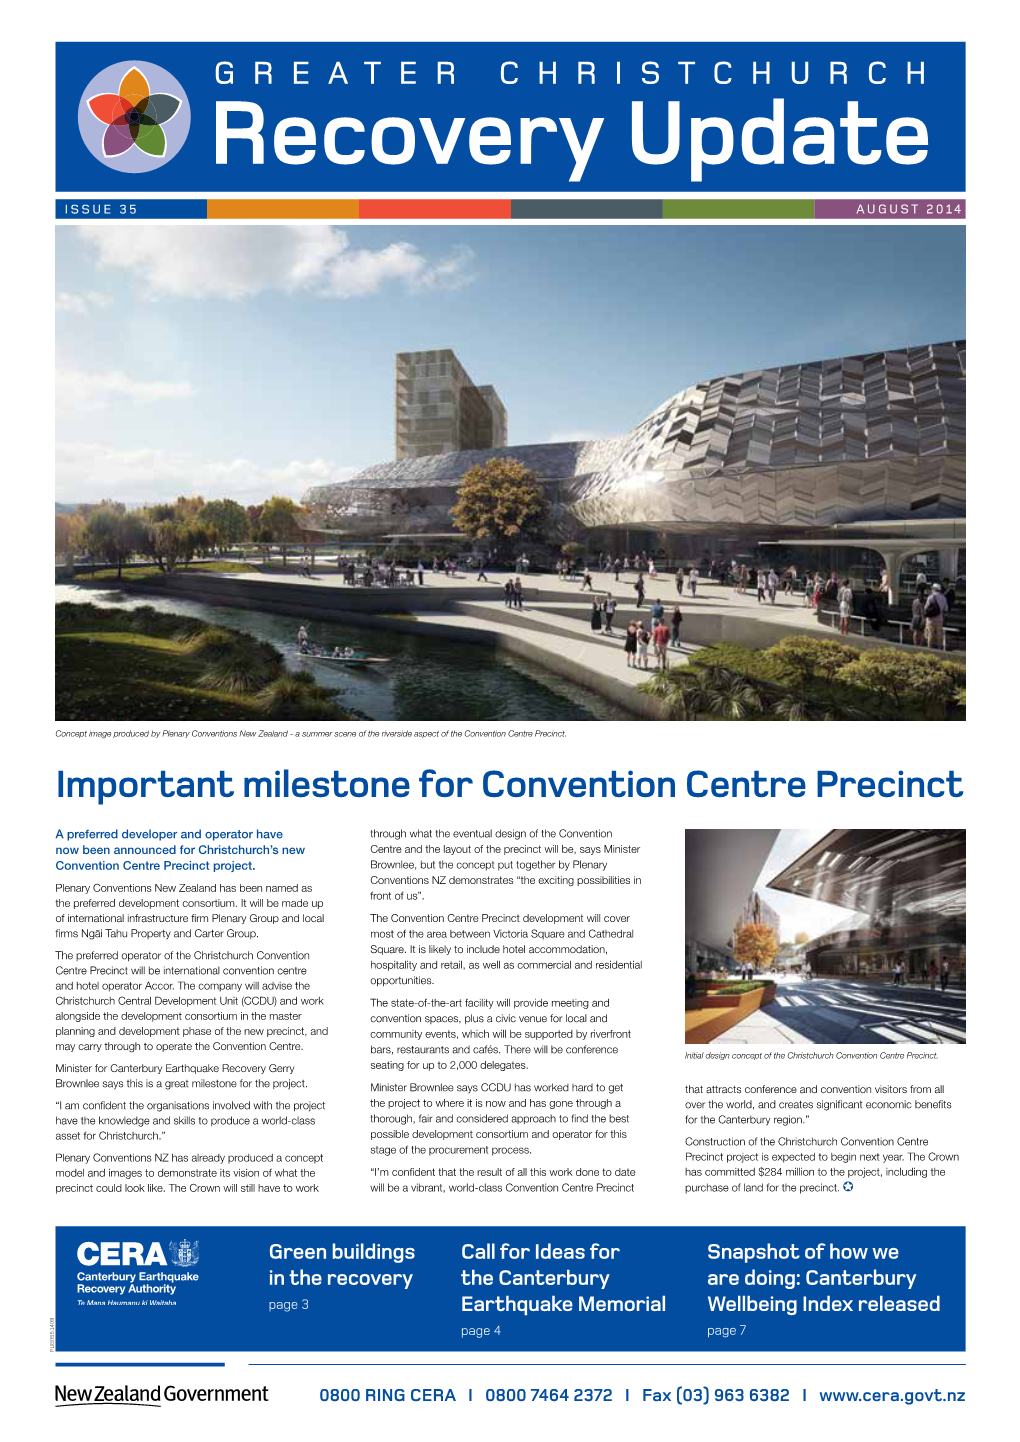 File (Greater-Christchurch-Recovery-Update-Issue-35-August-2014.Pdf)